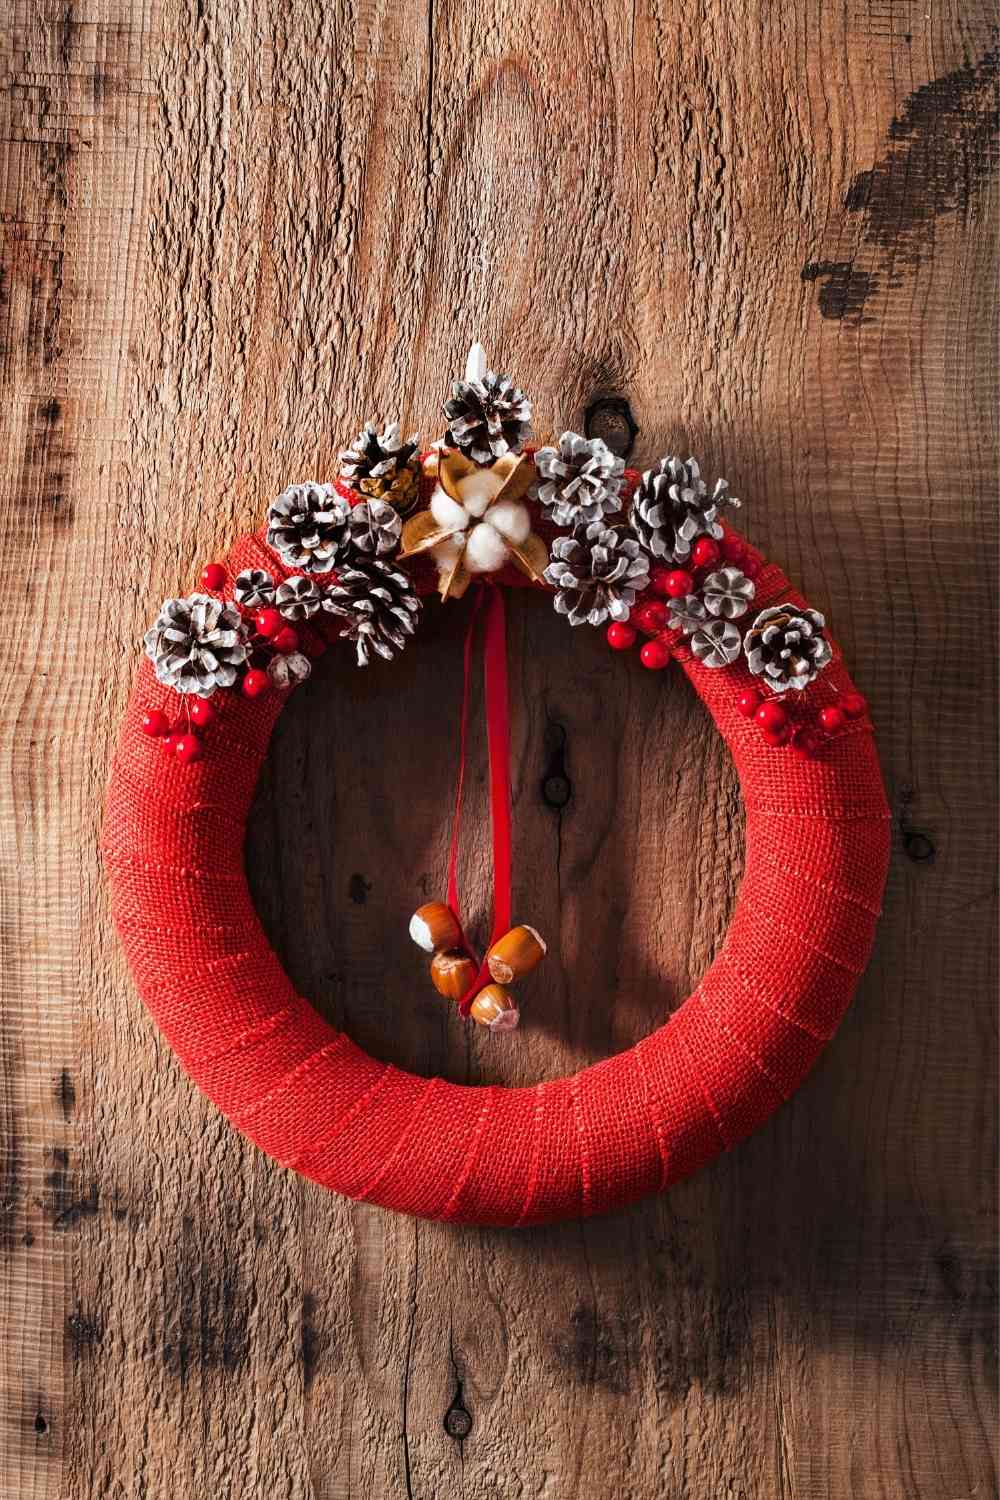 Other unique ideas to decorate the doors with DIY wreaths